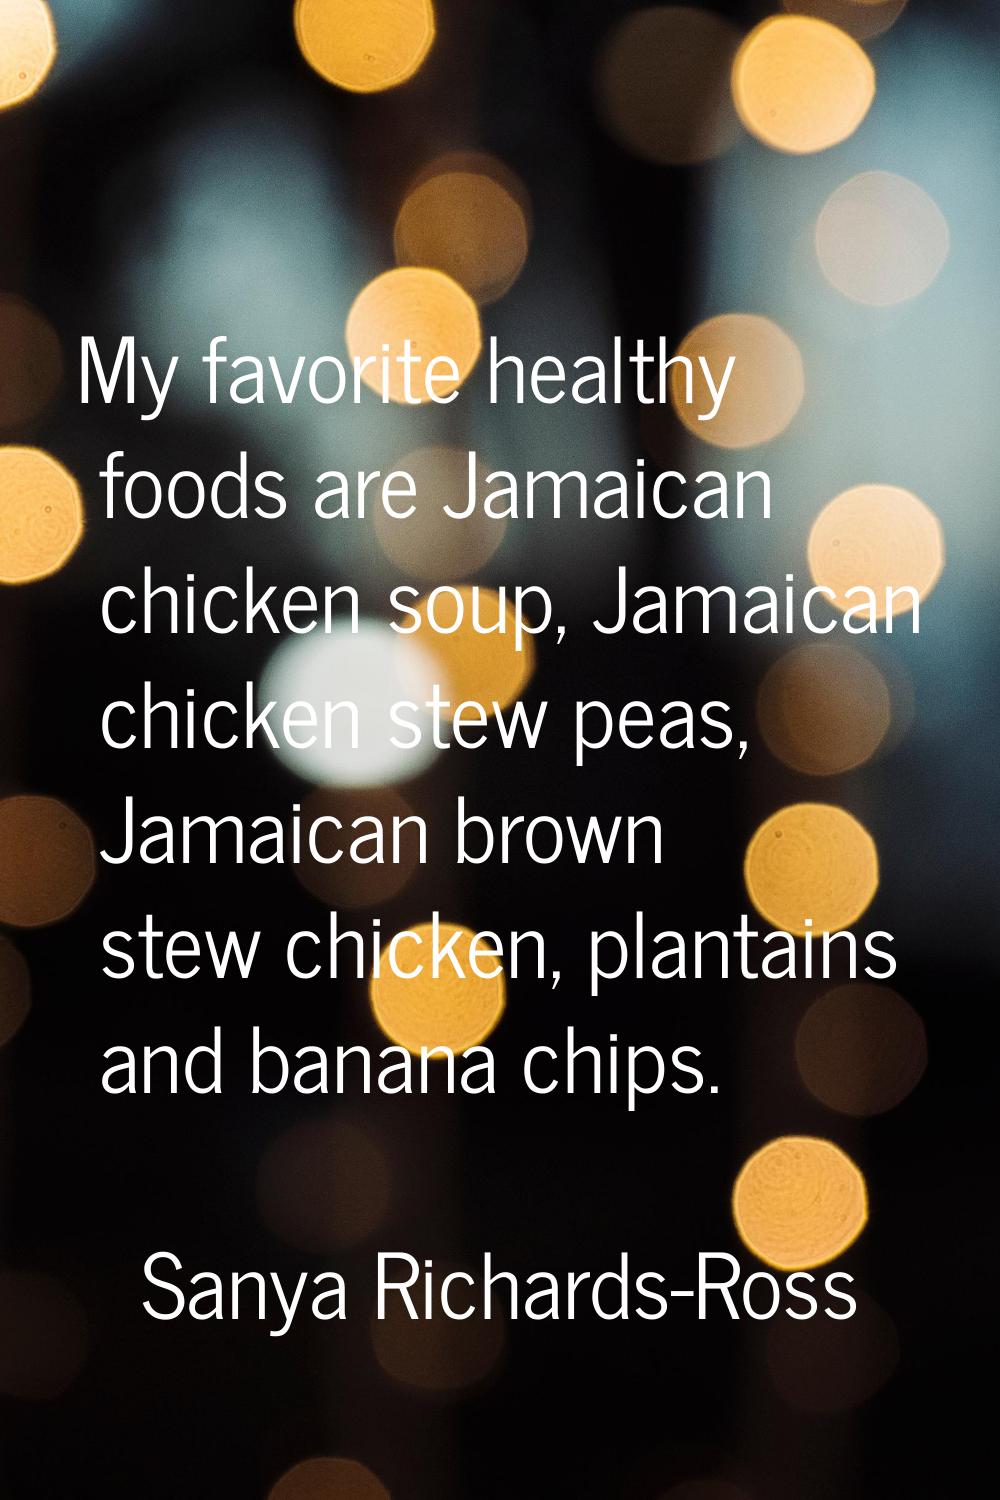 My favorite healthy foods are Jamaican chicken soup, Jamaican chicken stew peas, Jamaican brown ste